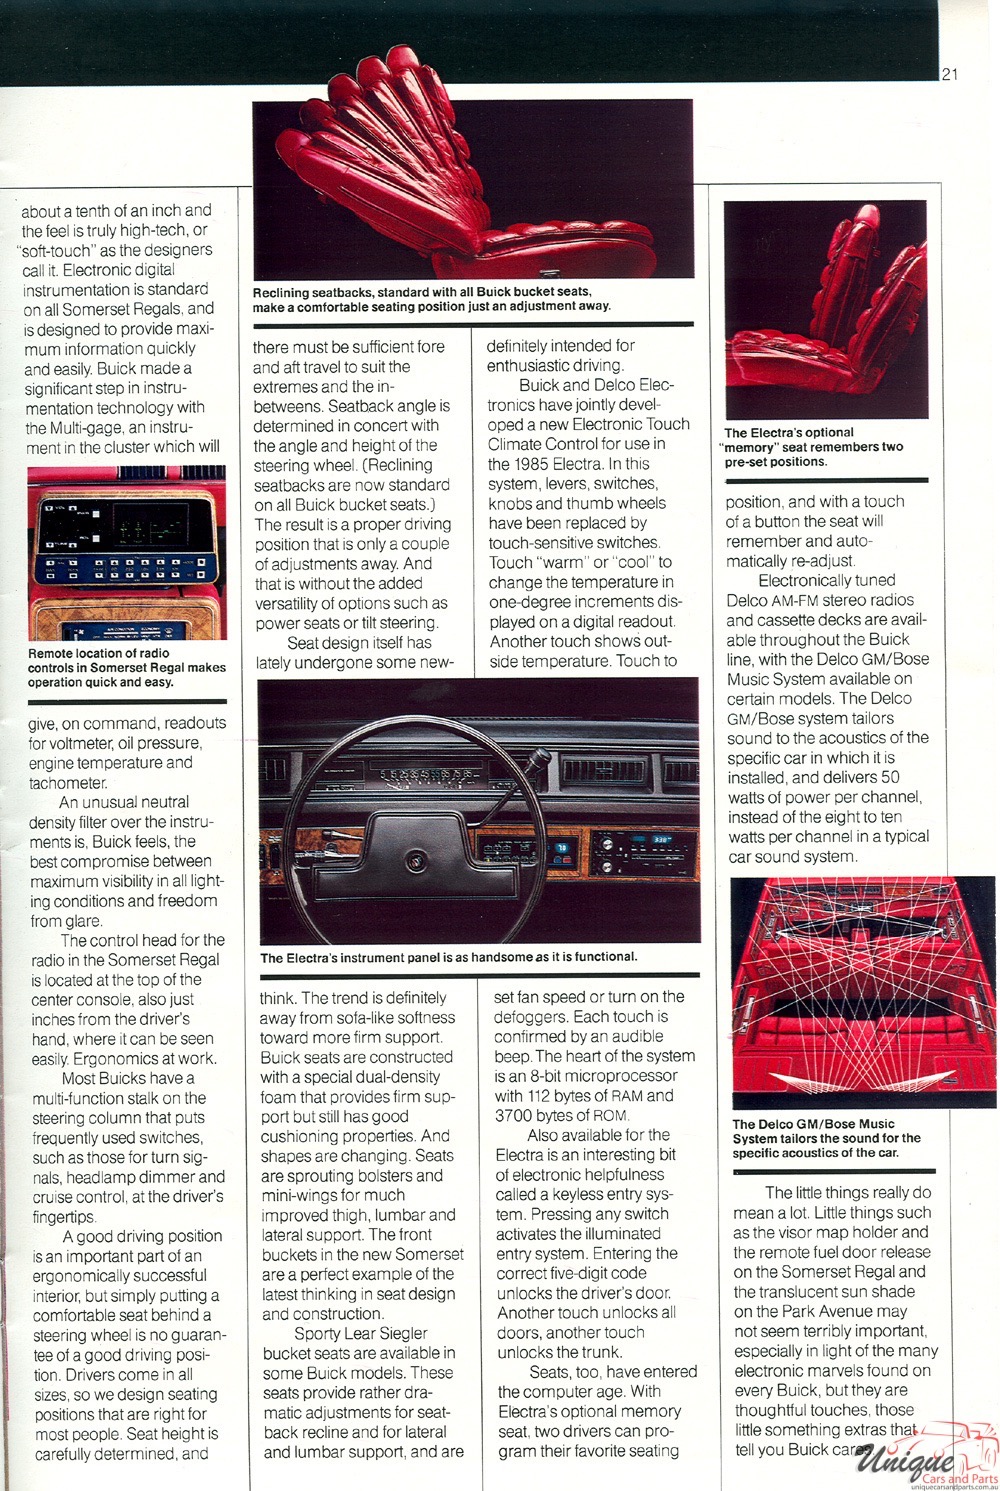 1985 Buick Science Book Page 19